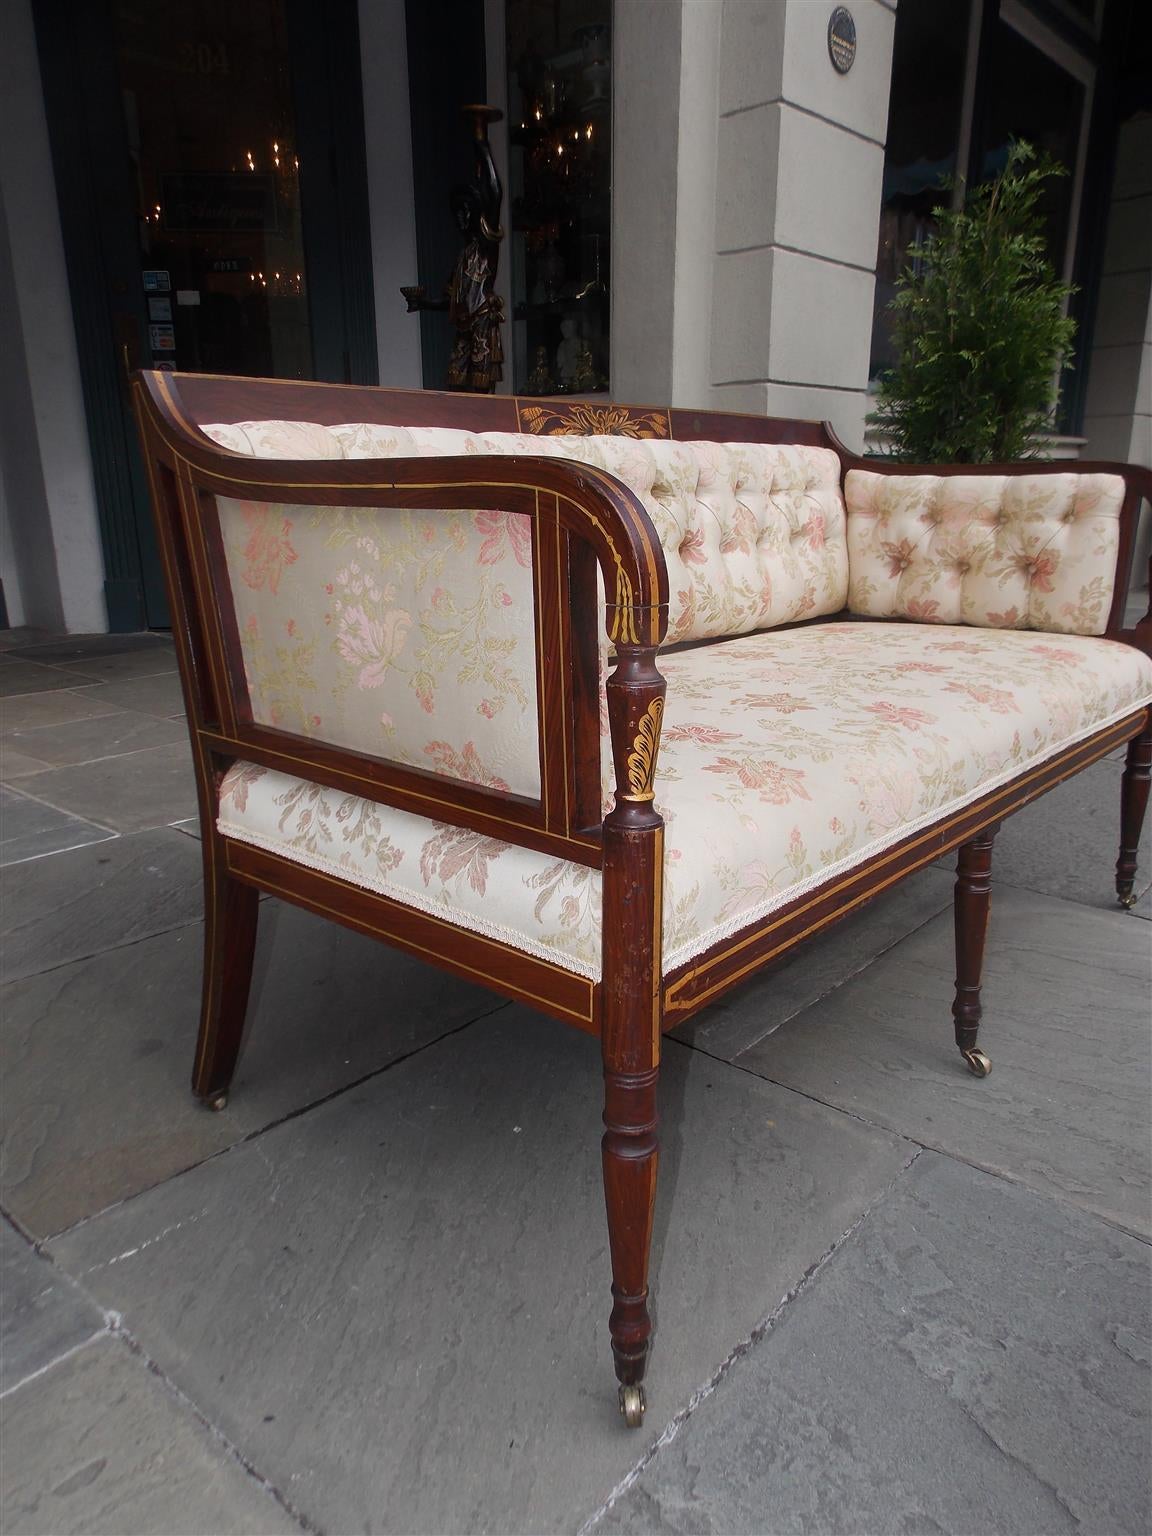 Late 18th Century English Regency Stenciled and Gilt Tufted Upholstered Settee, Circa 1780 For Sale